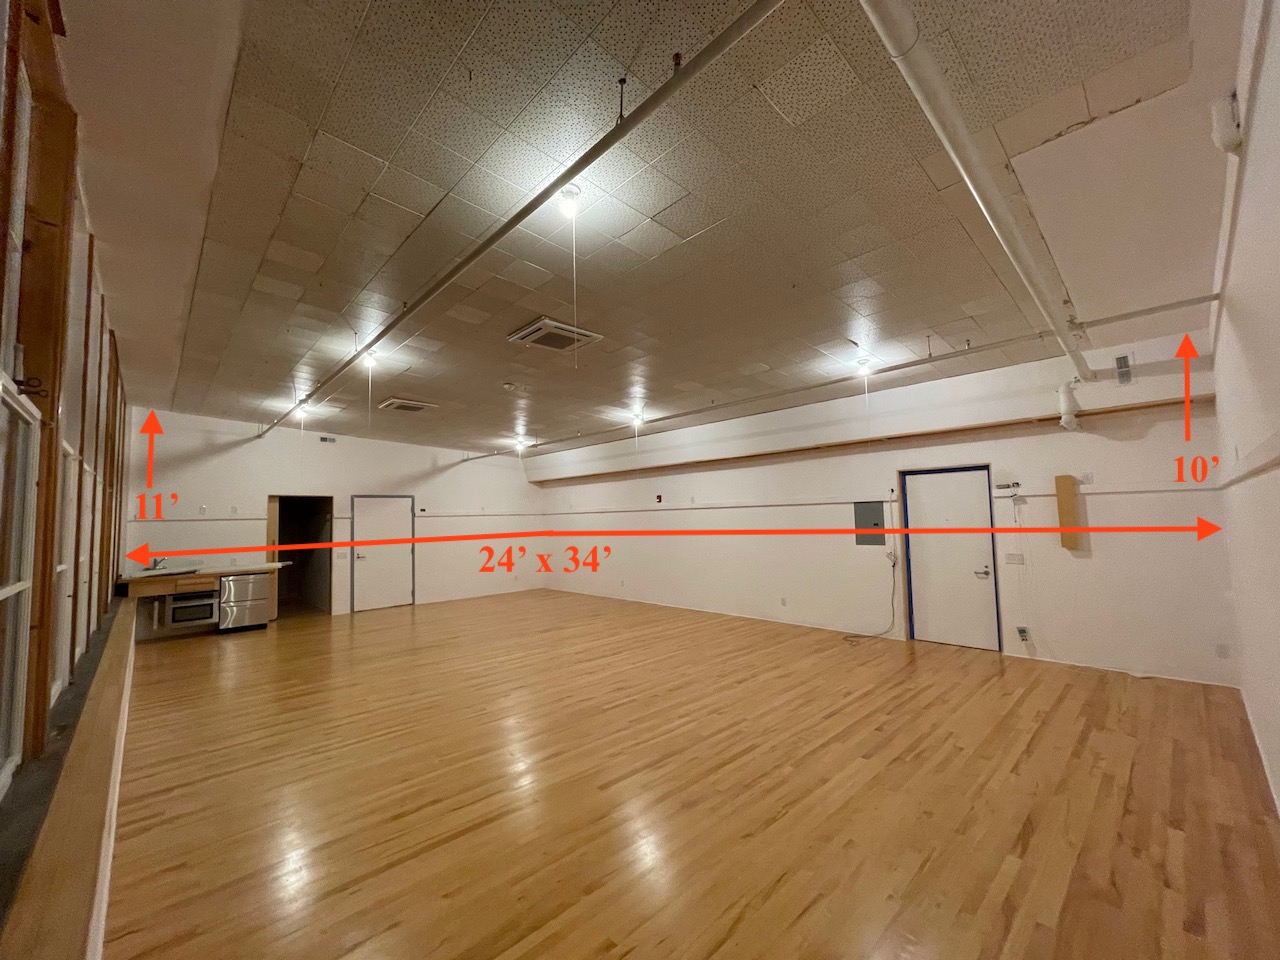 Full floor view of a 24' x 35' room with 10' ceilings sloping to 11'